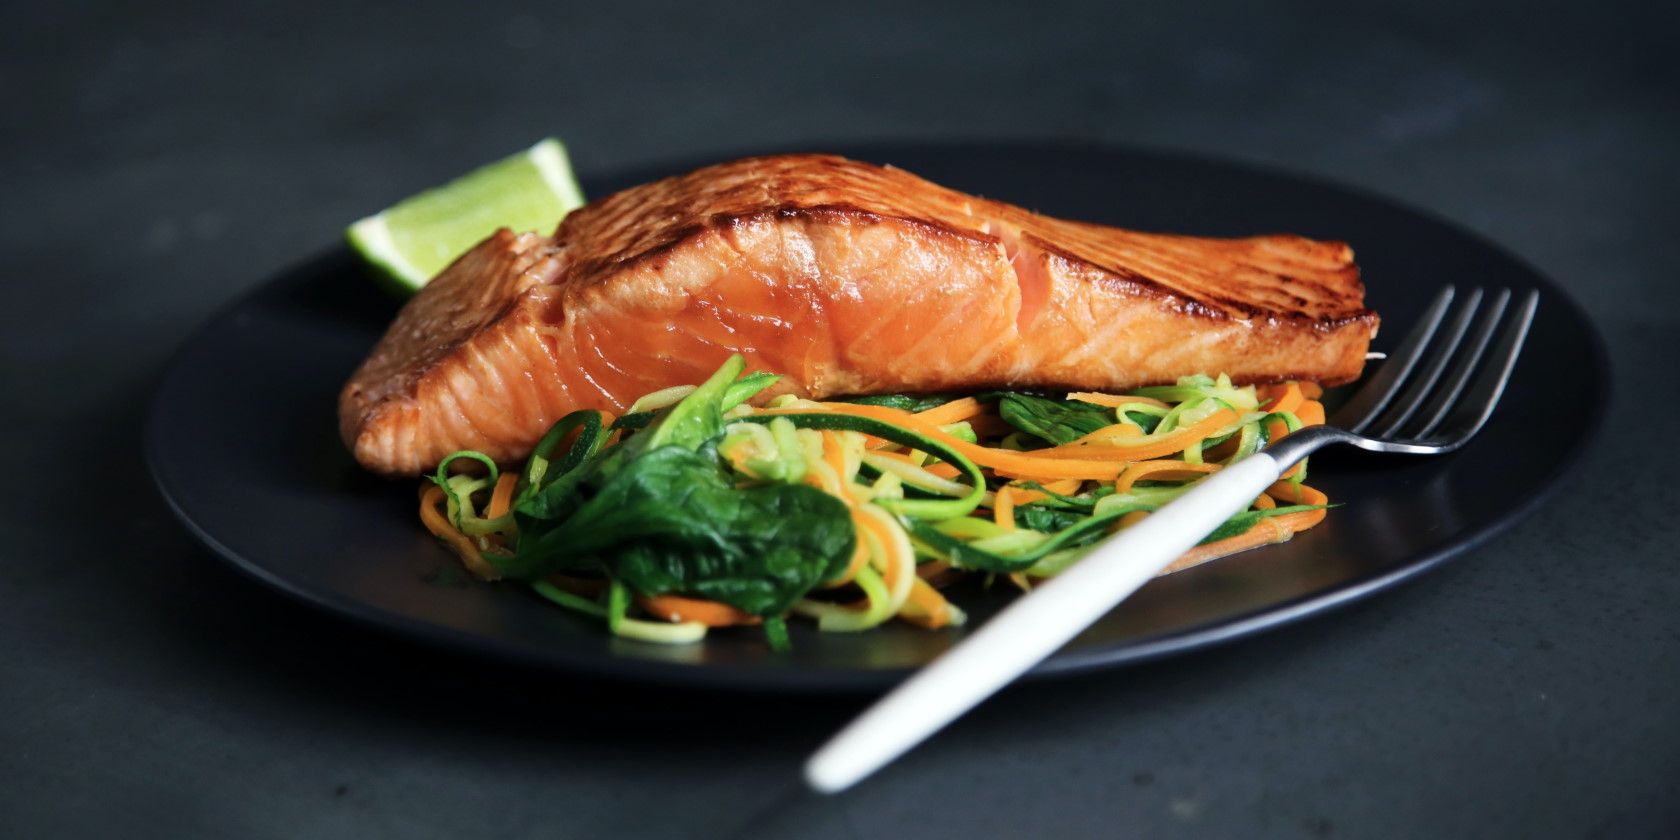 Close-up of cooked salmon and salad on black plate